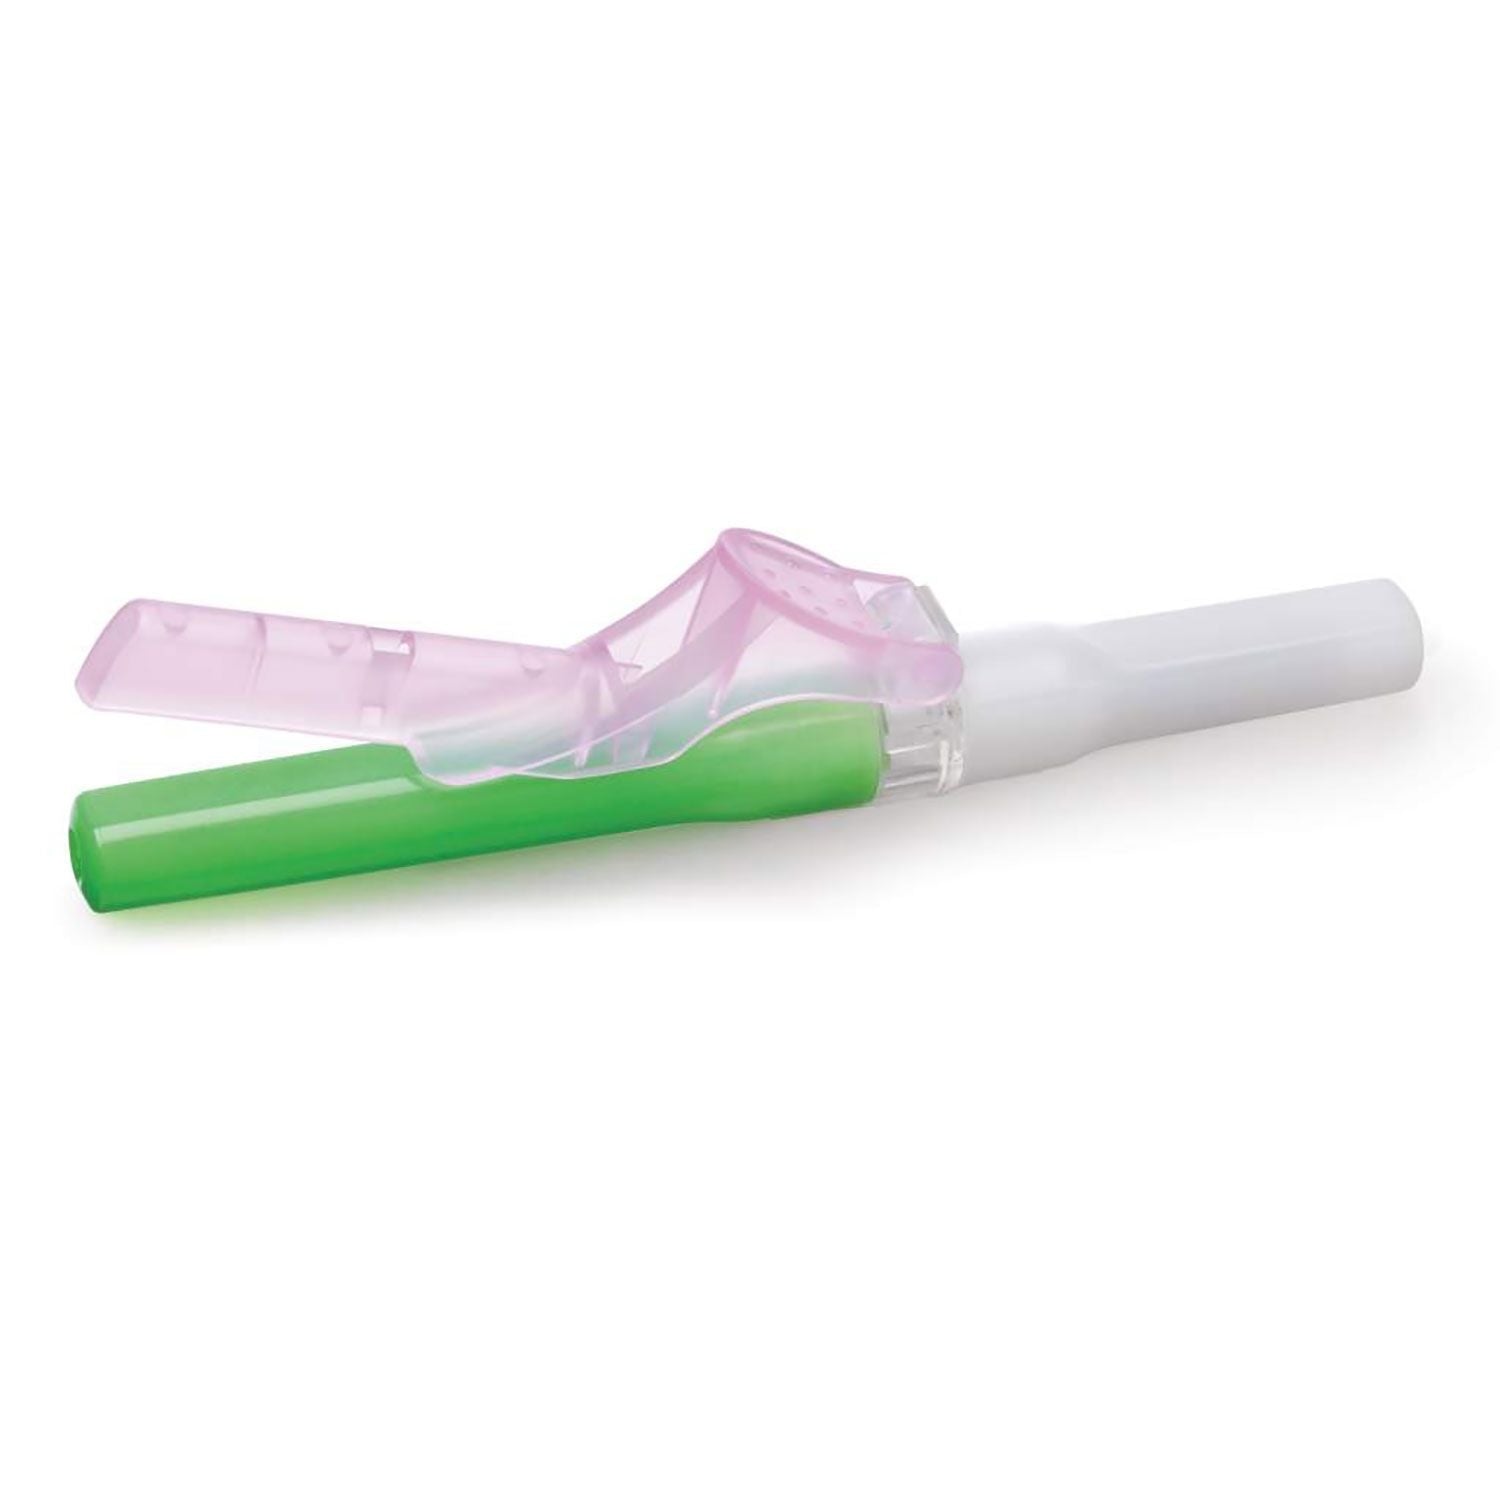 BD Vacutainer Eclipse Safety Blood Collection Needle | Green x 21G x 1.25" | Pack of 48